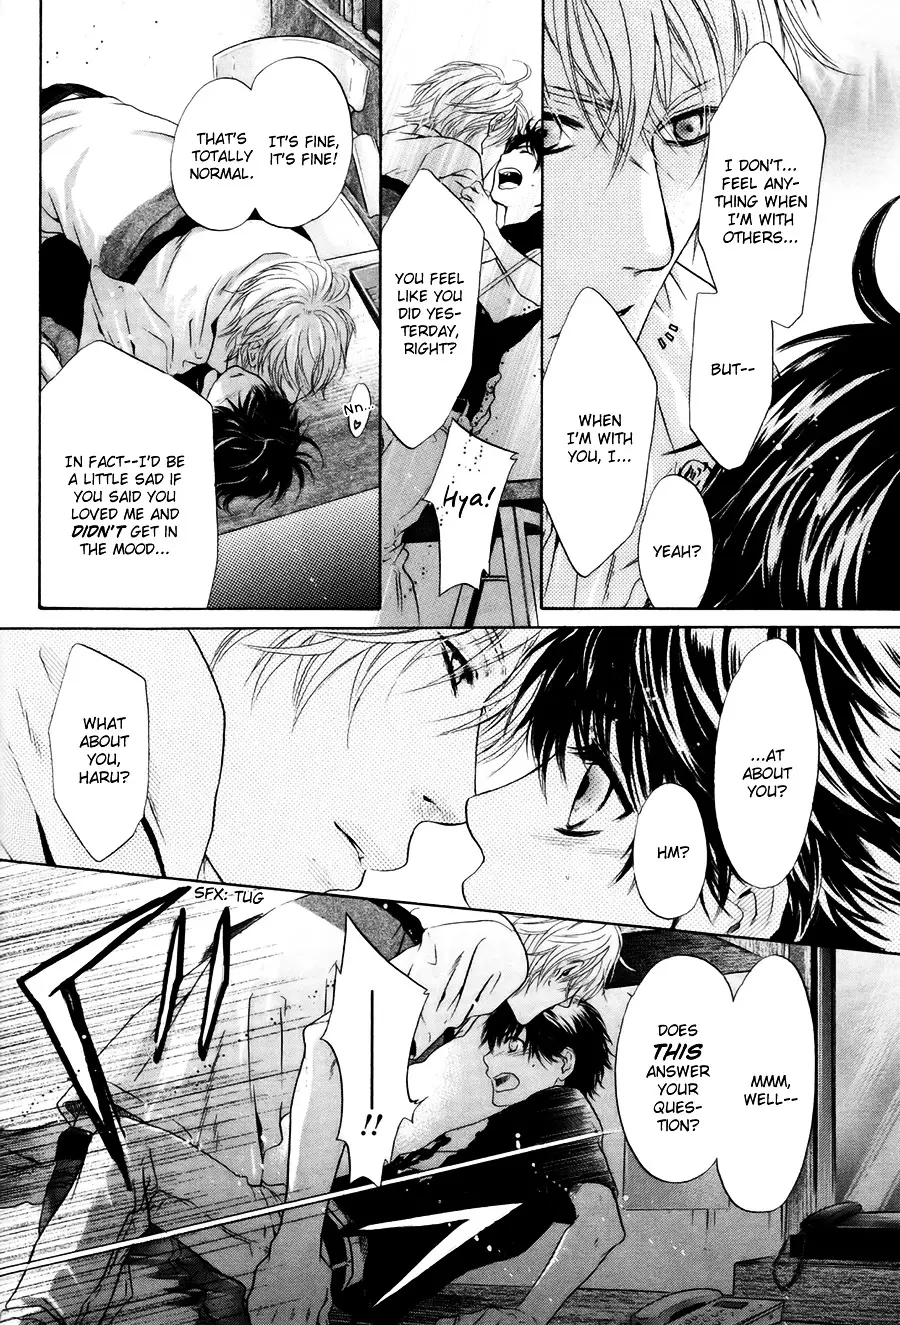 Super Lovers - 9 page 55-1db31dfb